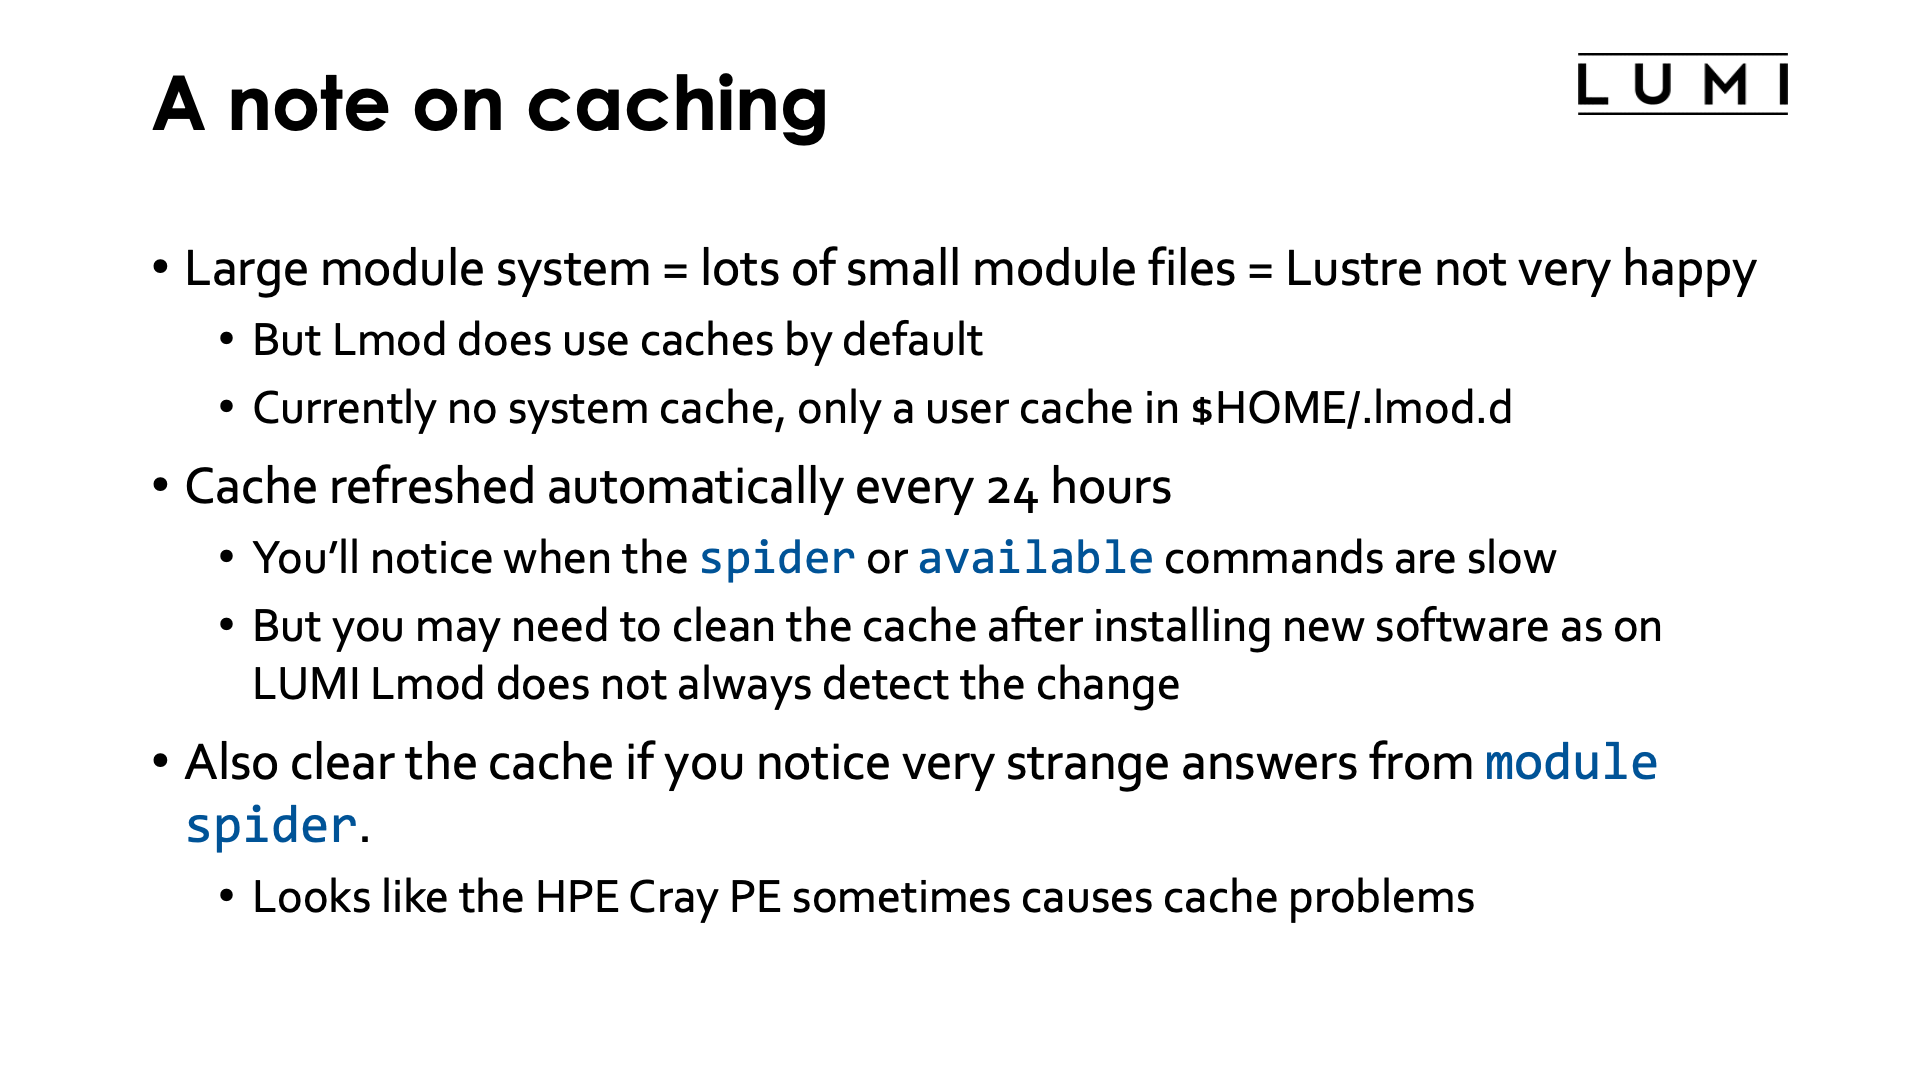 A note on caching